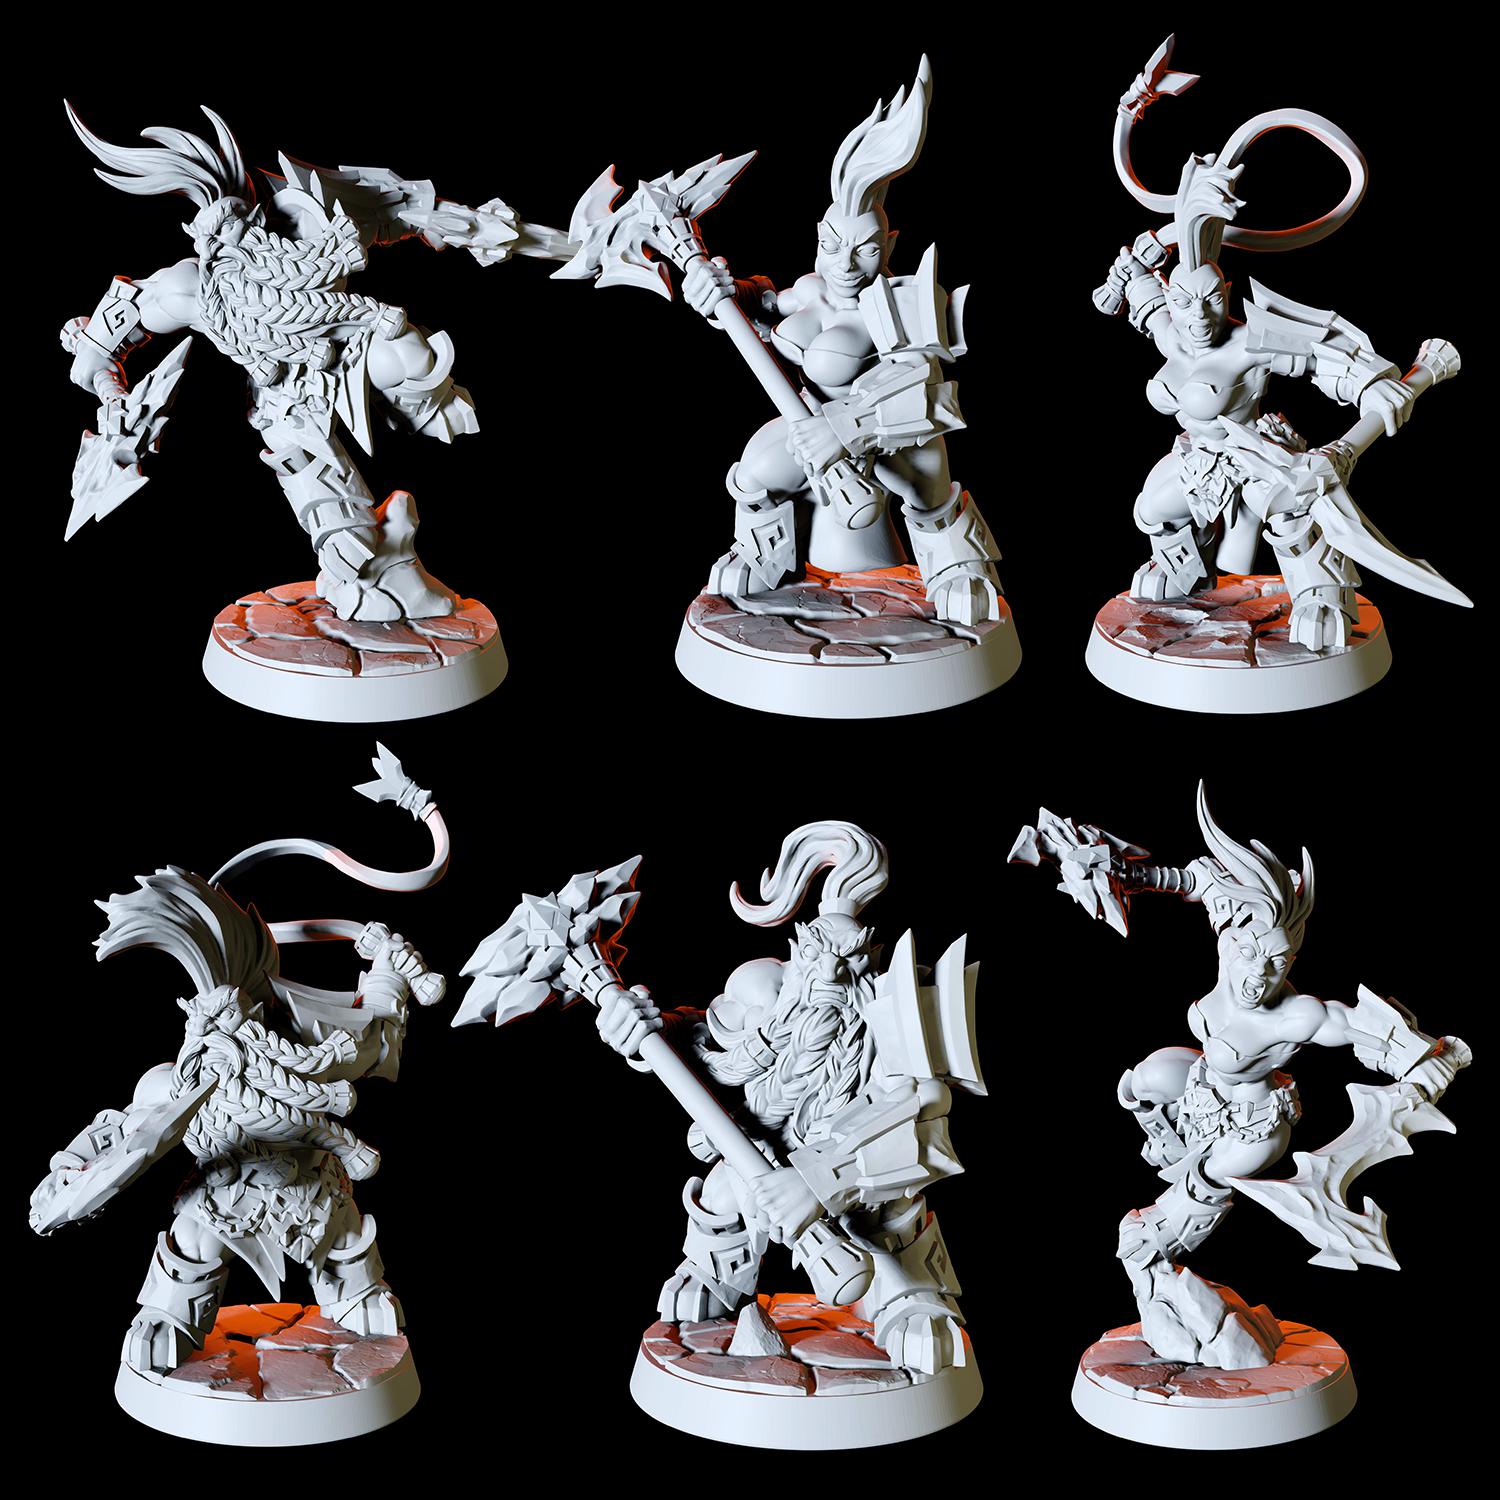 Fire Dwarf Army - Six Miniatures Miniature for Dungeons and Dragons